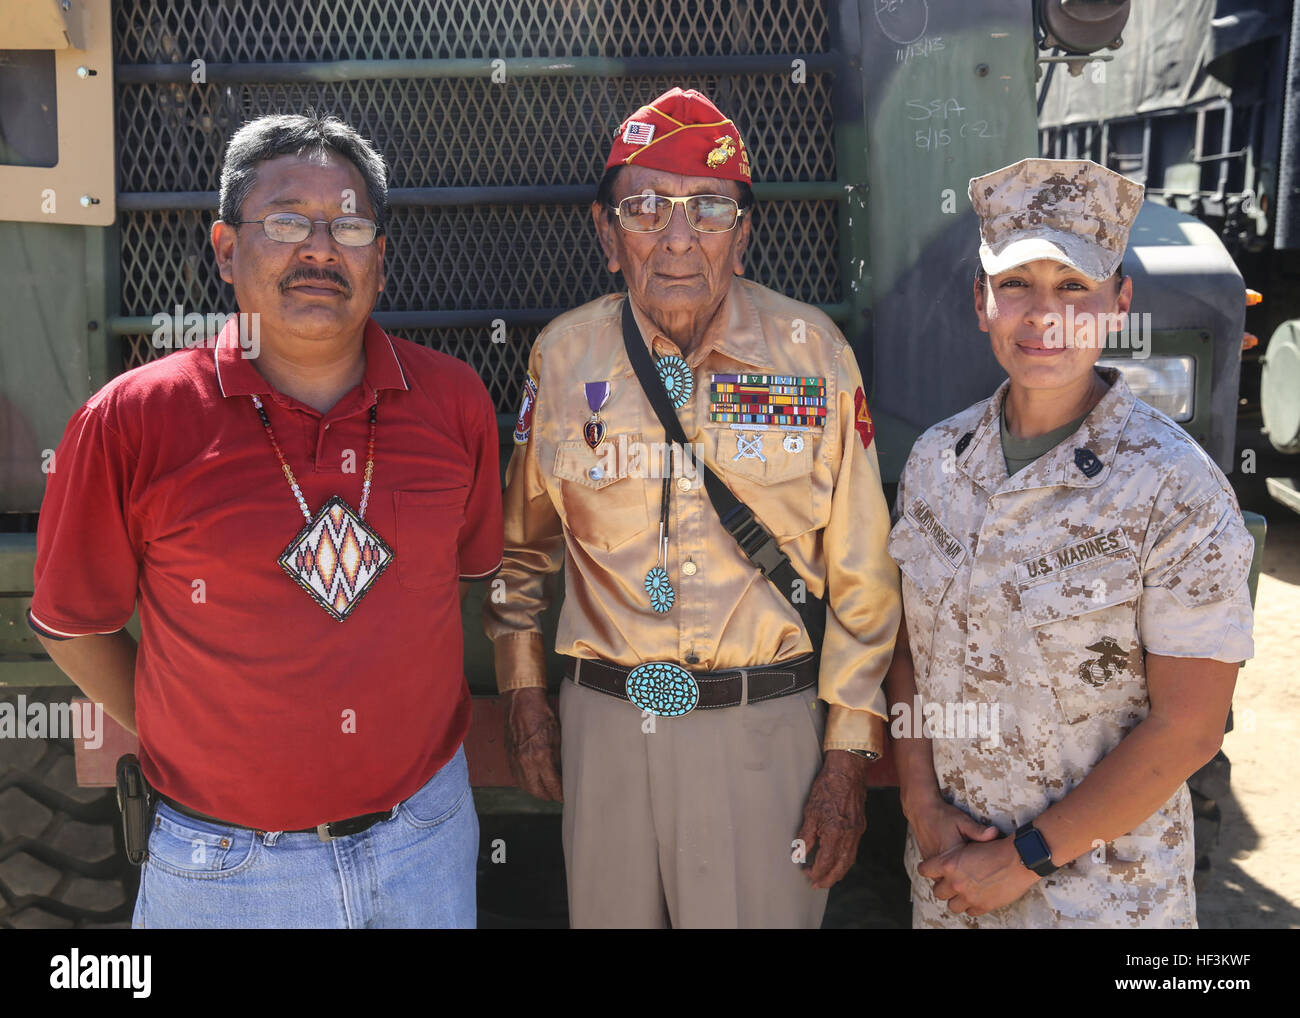 Navajo Code Talker Samuel T. Holiday poses with his son, Ricky Gray, and 1st Sgt. Christina Hunts Horse-May, first sergeant for Company C, 9th Communication Battalion, I Marine Expeditionary Force Headquarters Group, during a visit to a static display held by 9th Comm. Bn. aboard Marine Corps Base Camp Pendleton, Calif., Sept. 28, 2015. The visit allowed for the Marines to showcase their communications capabilities and build a bond between them and the Code Talkers. (U.S. Marine Corps photo by Pfc. Devan K. Gowans) Navajo Code Talkers tune in with 9th Comm Bn. 150928-M-GM943-121 Stock Photo